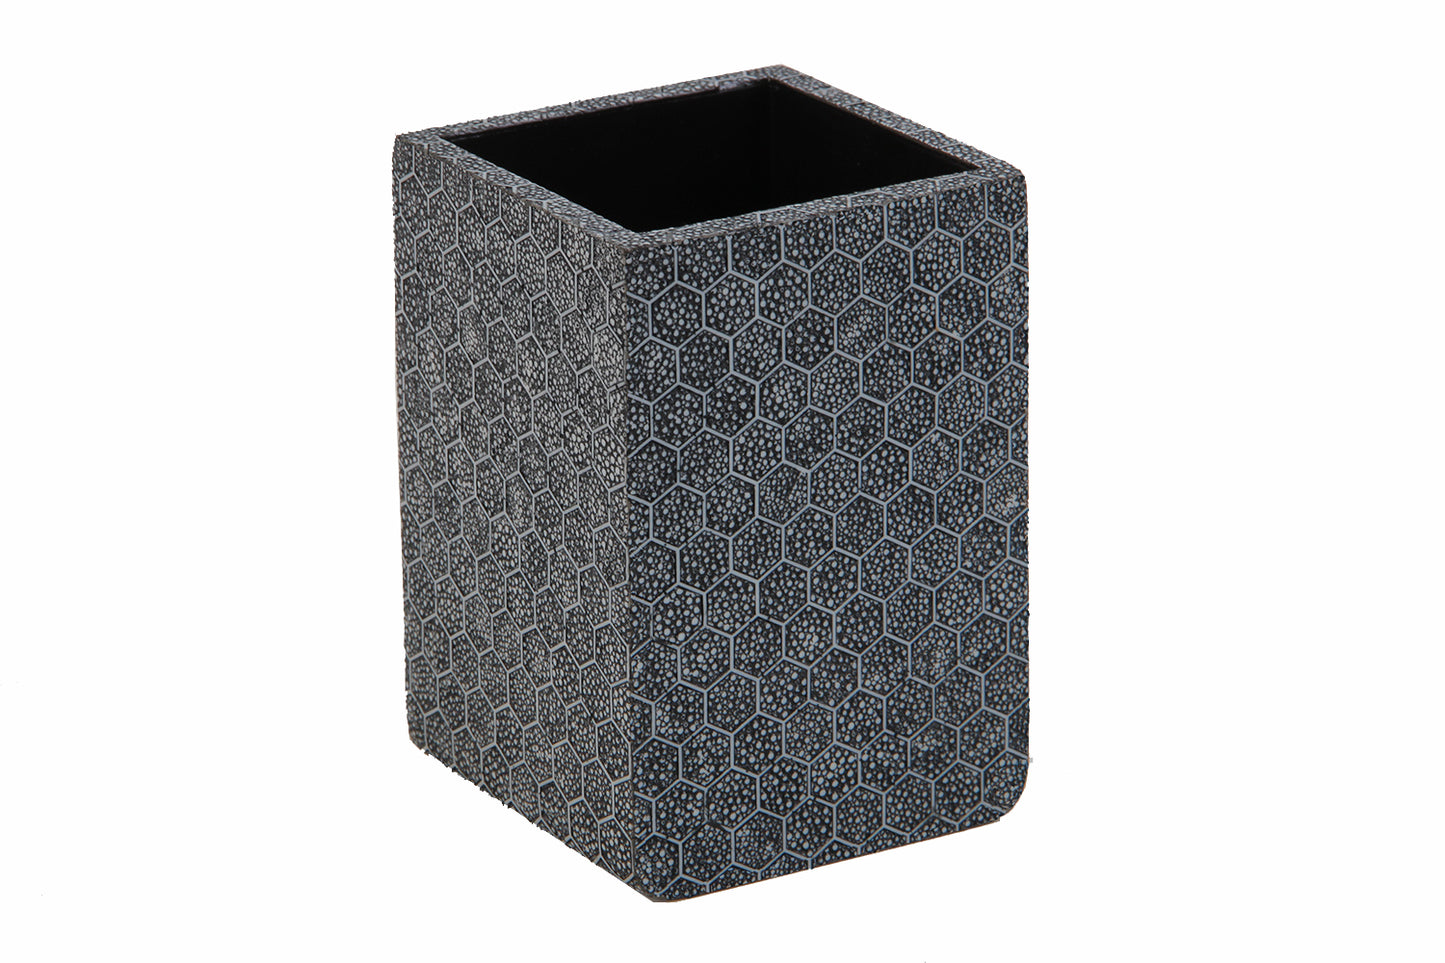 Hex Toothbrush Holder in Charcoal Shagreen